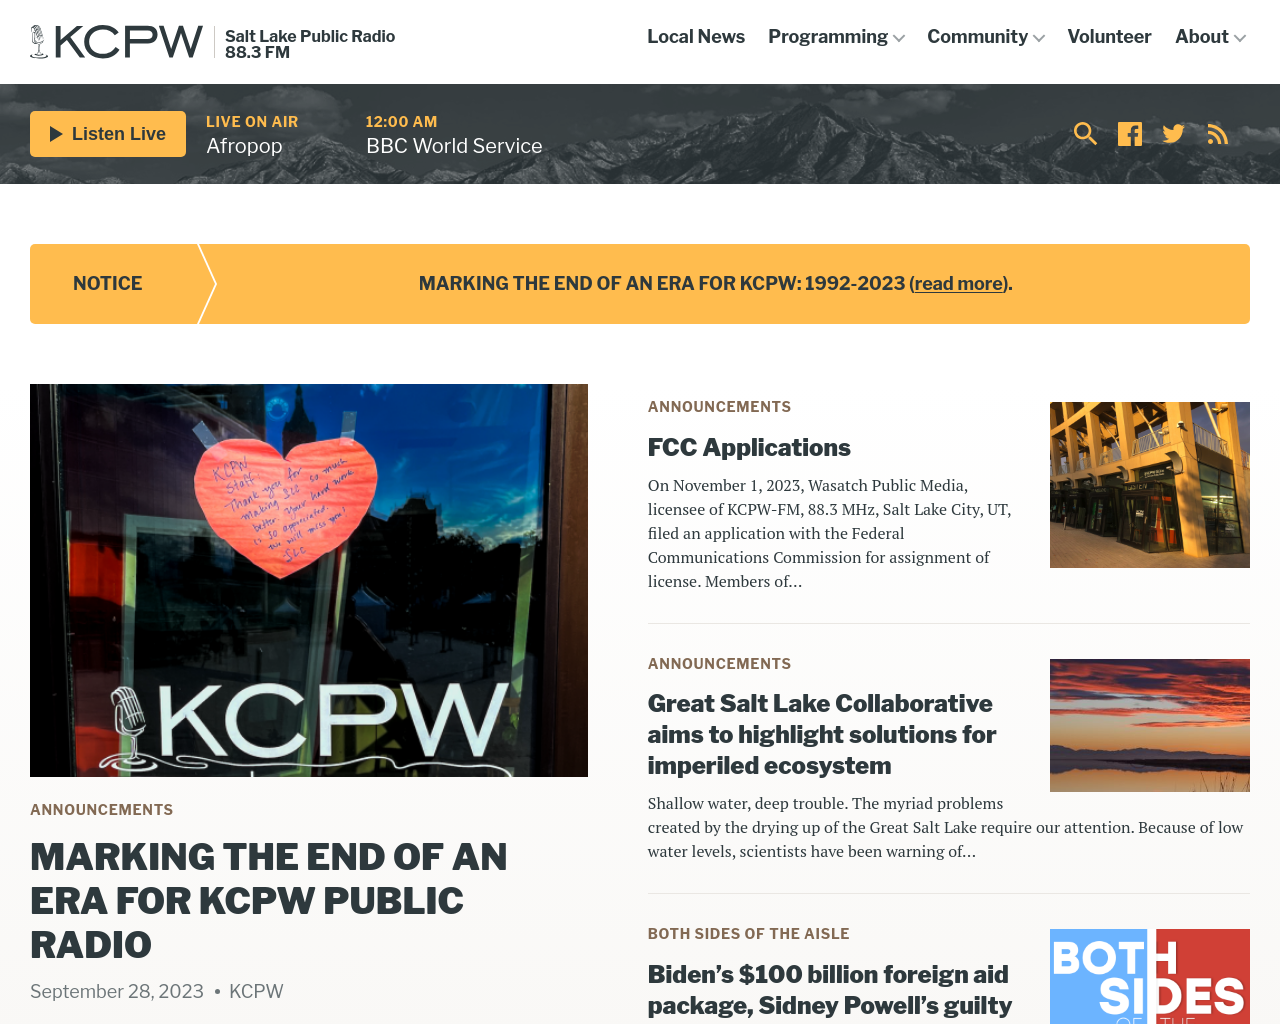 kcpw.org